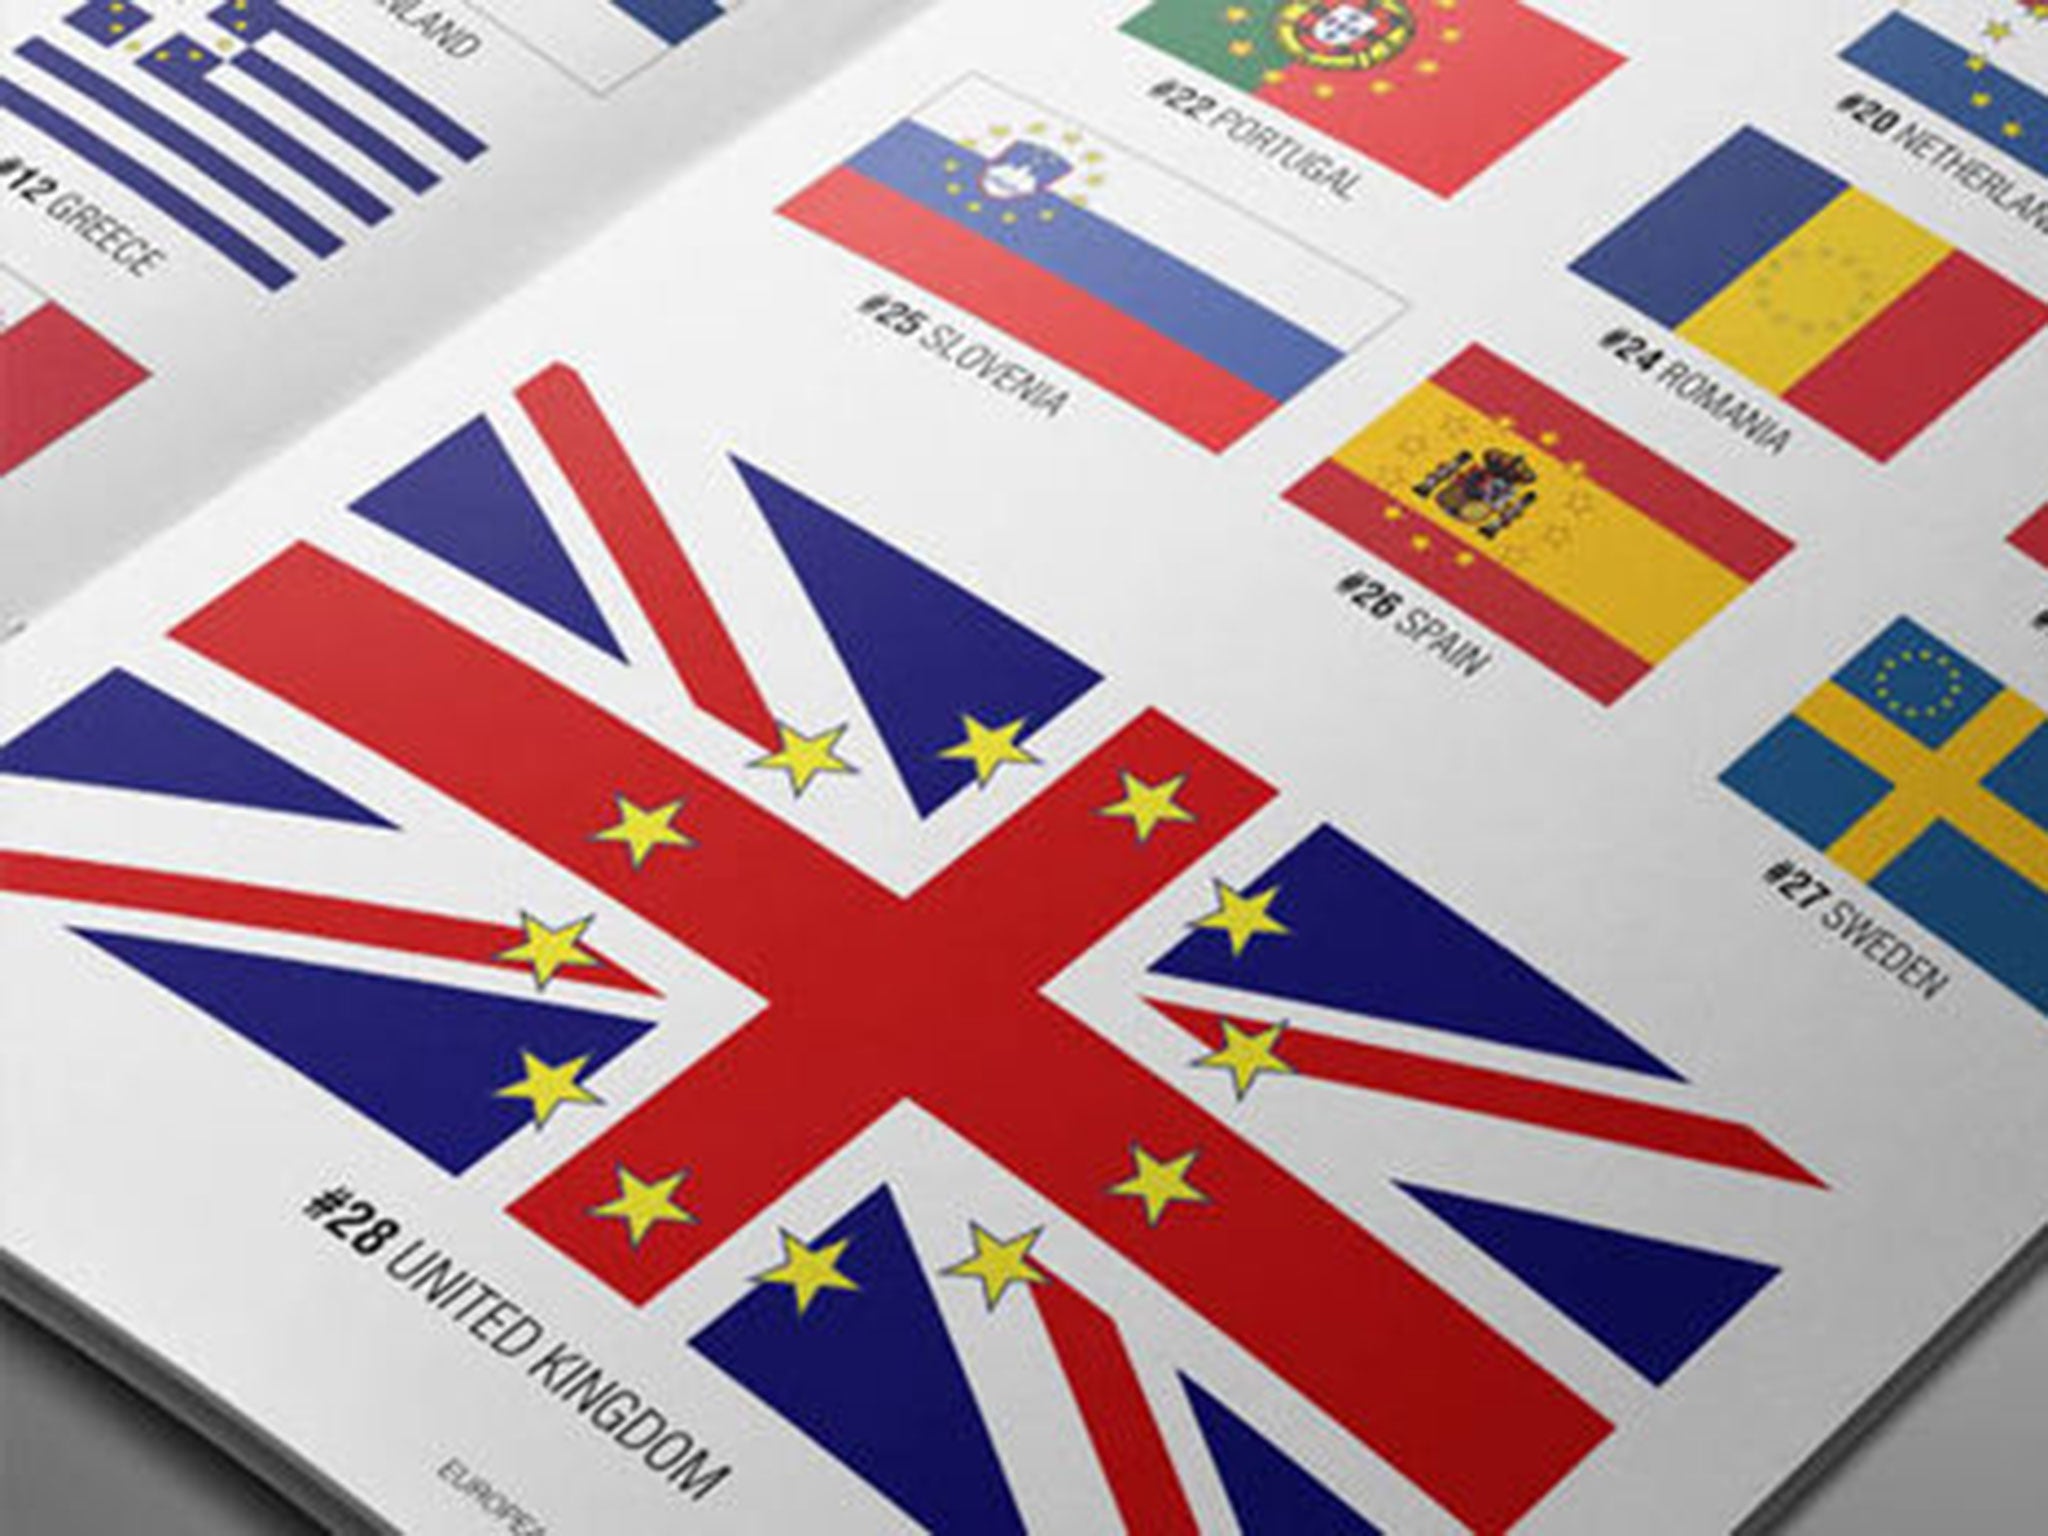 The Express imagined what the flag might look like